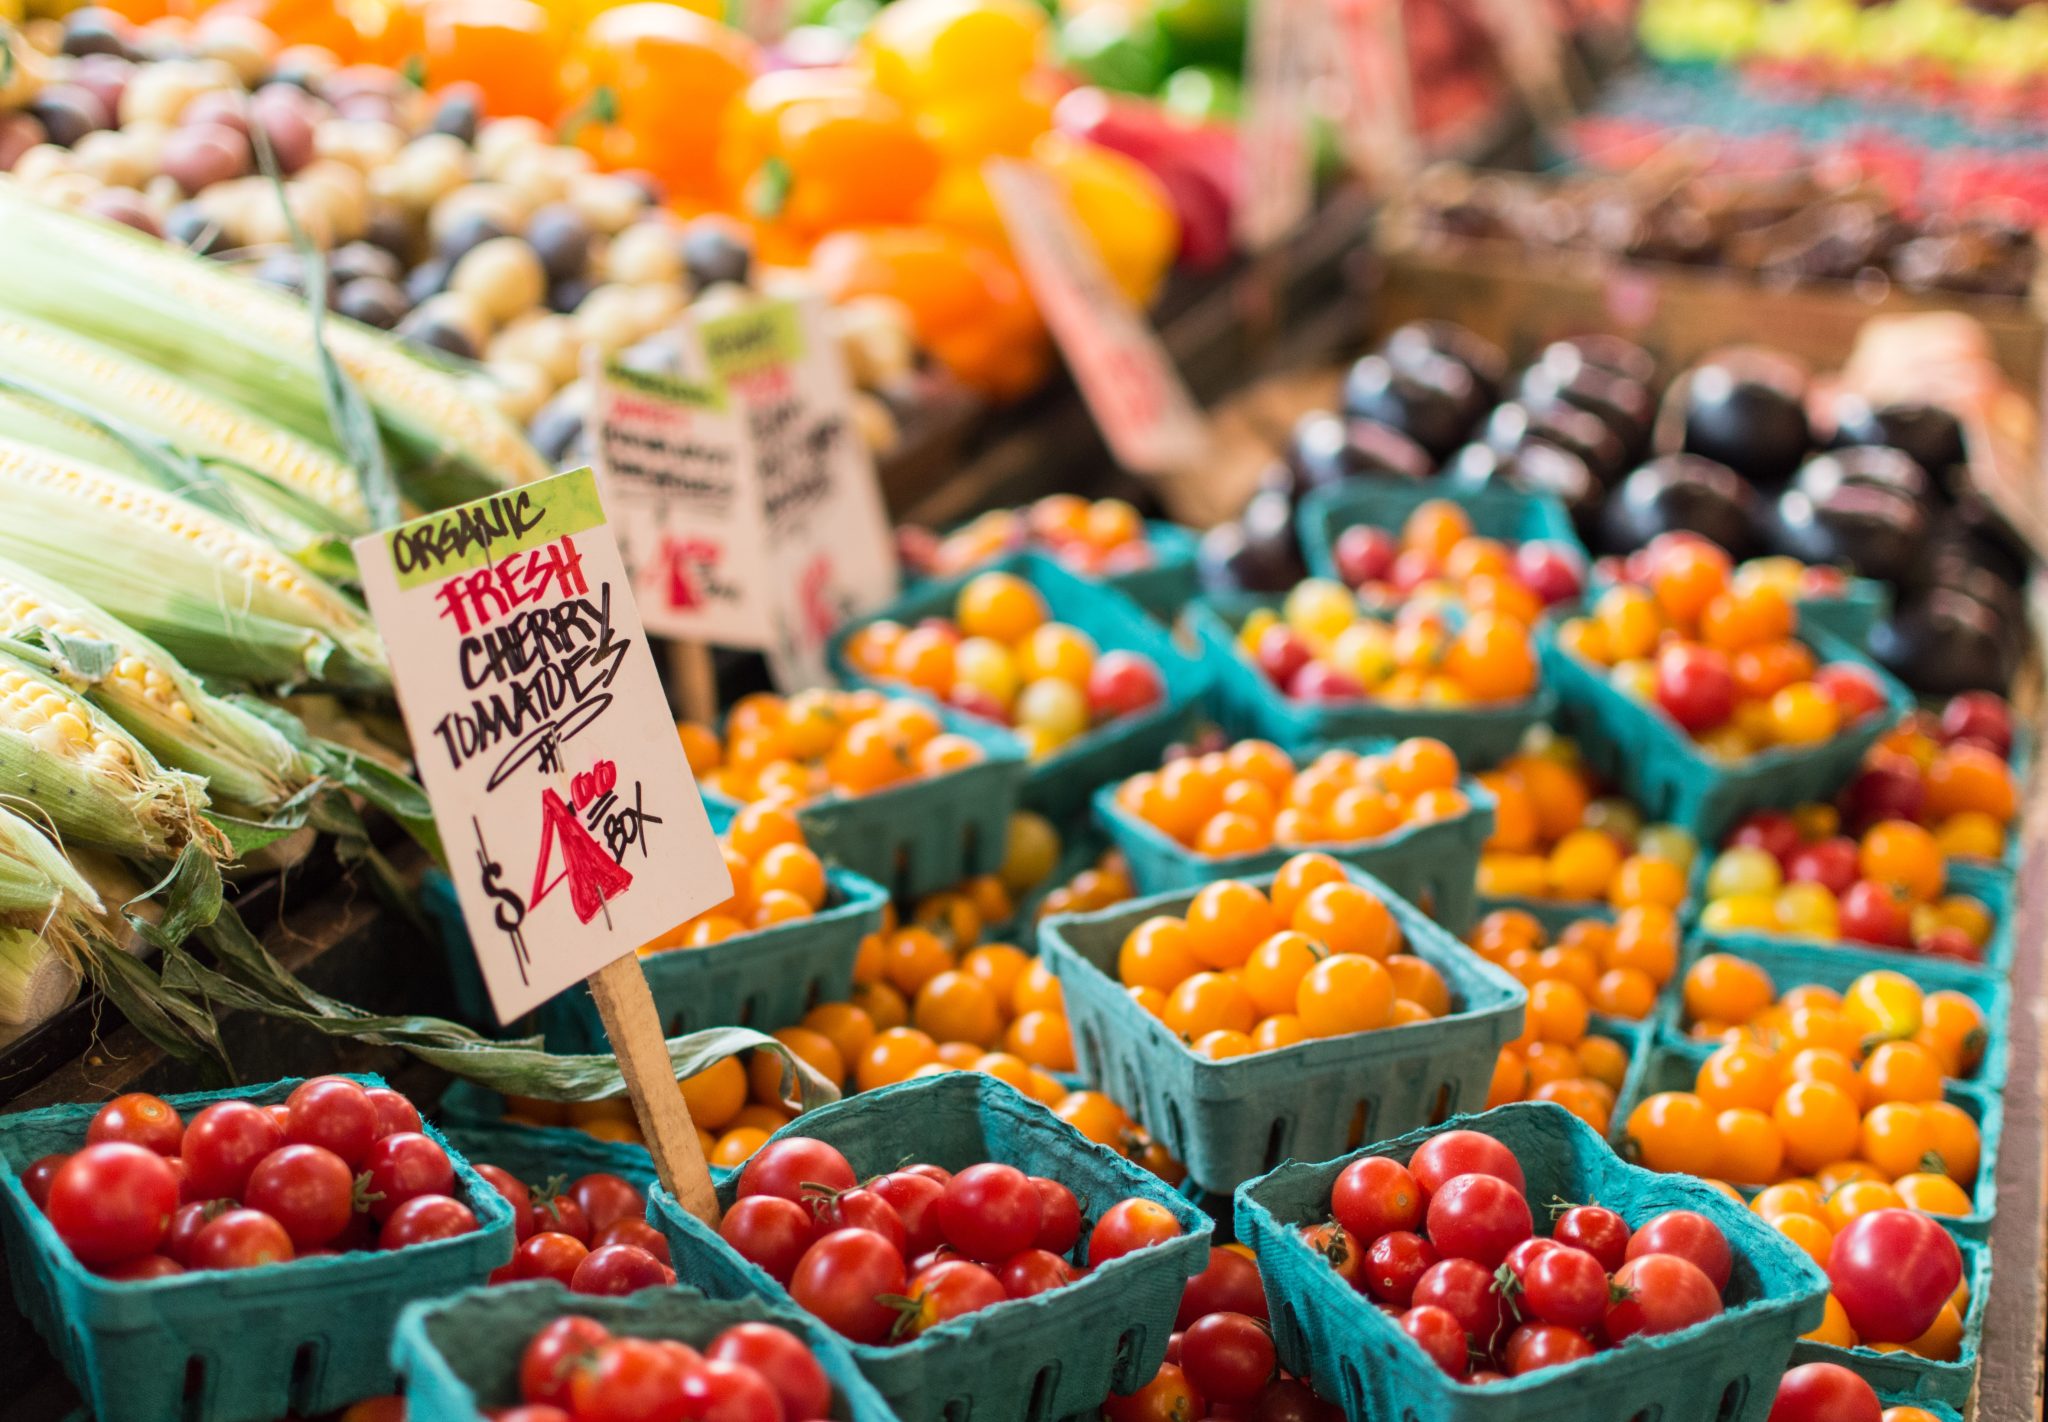 Find fresh produce and more at the Sunbury Village Market!